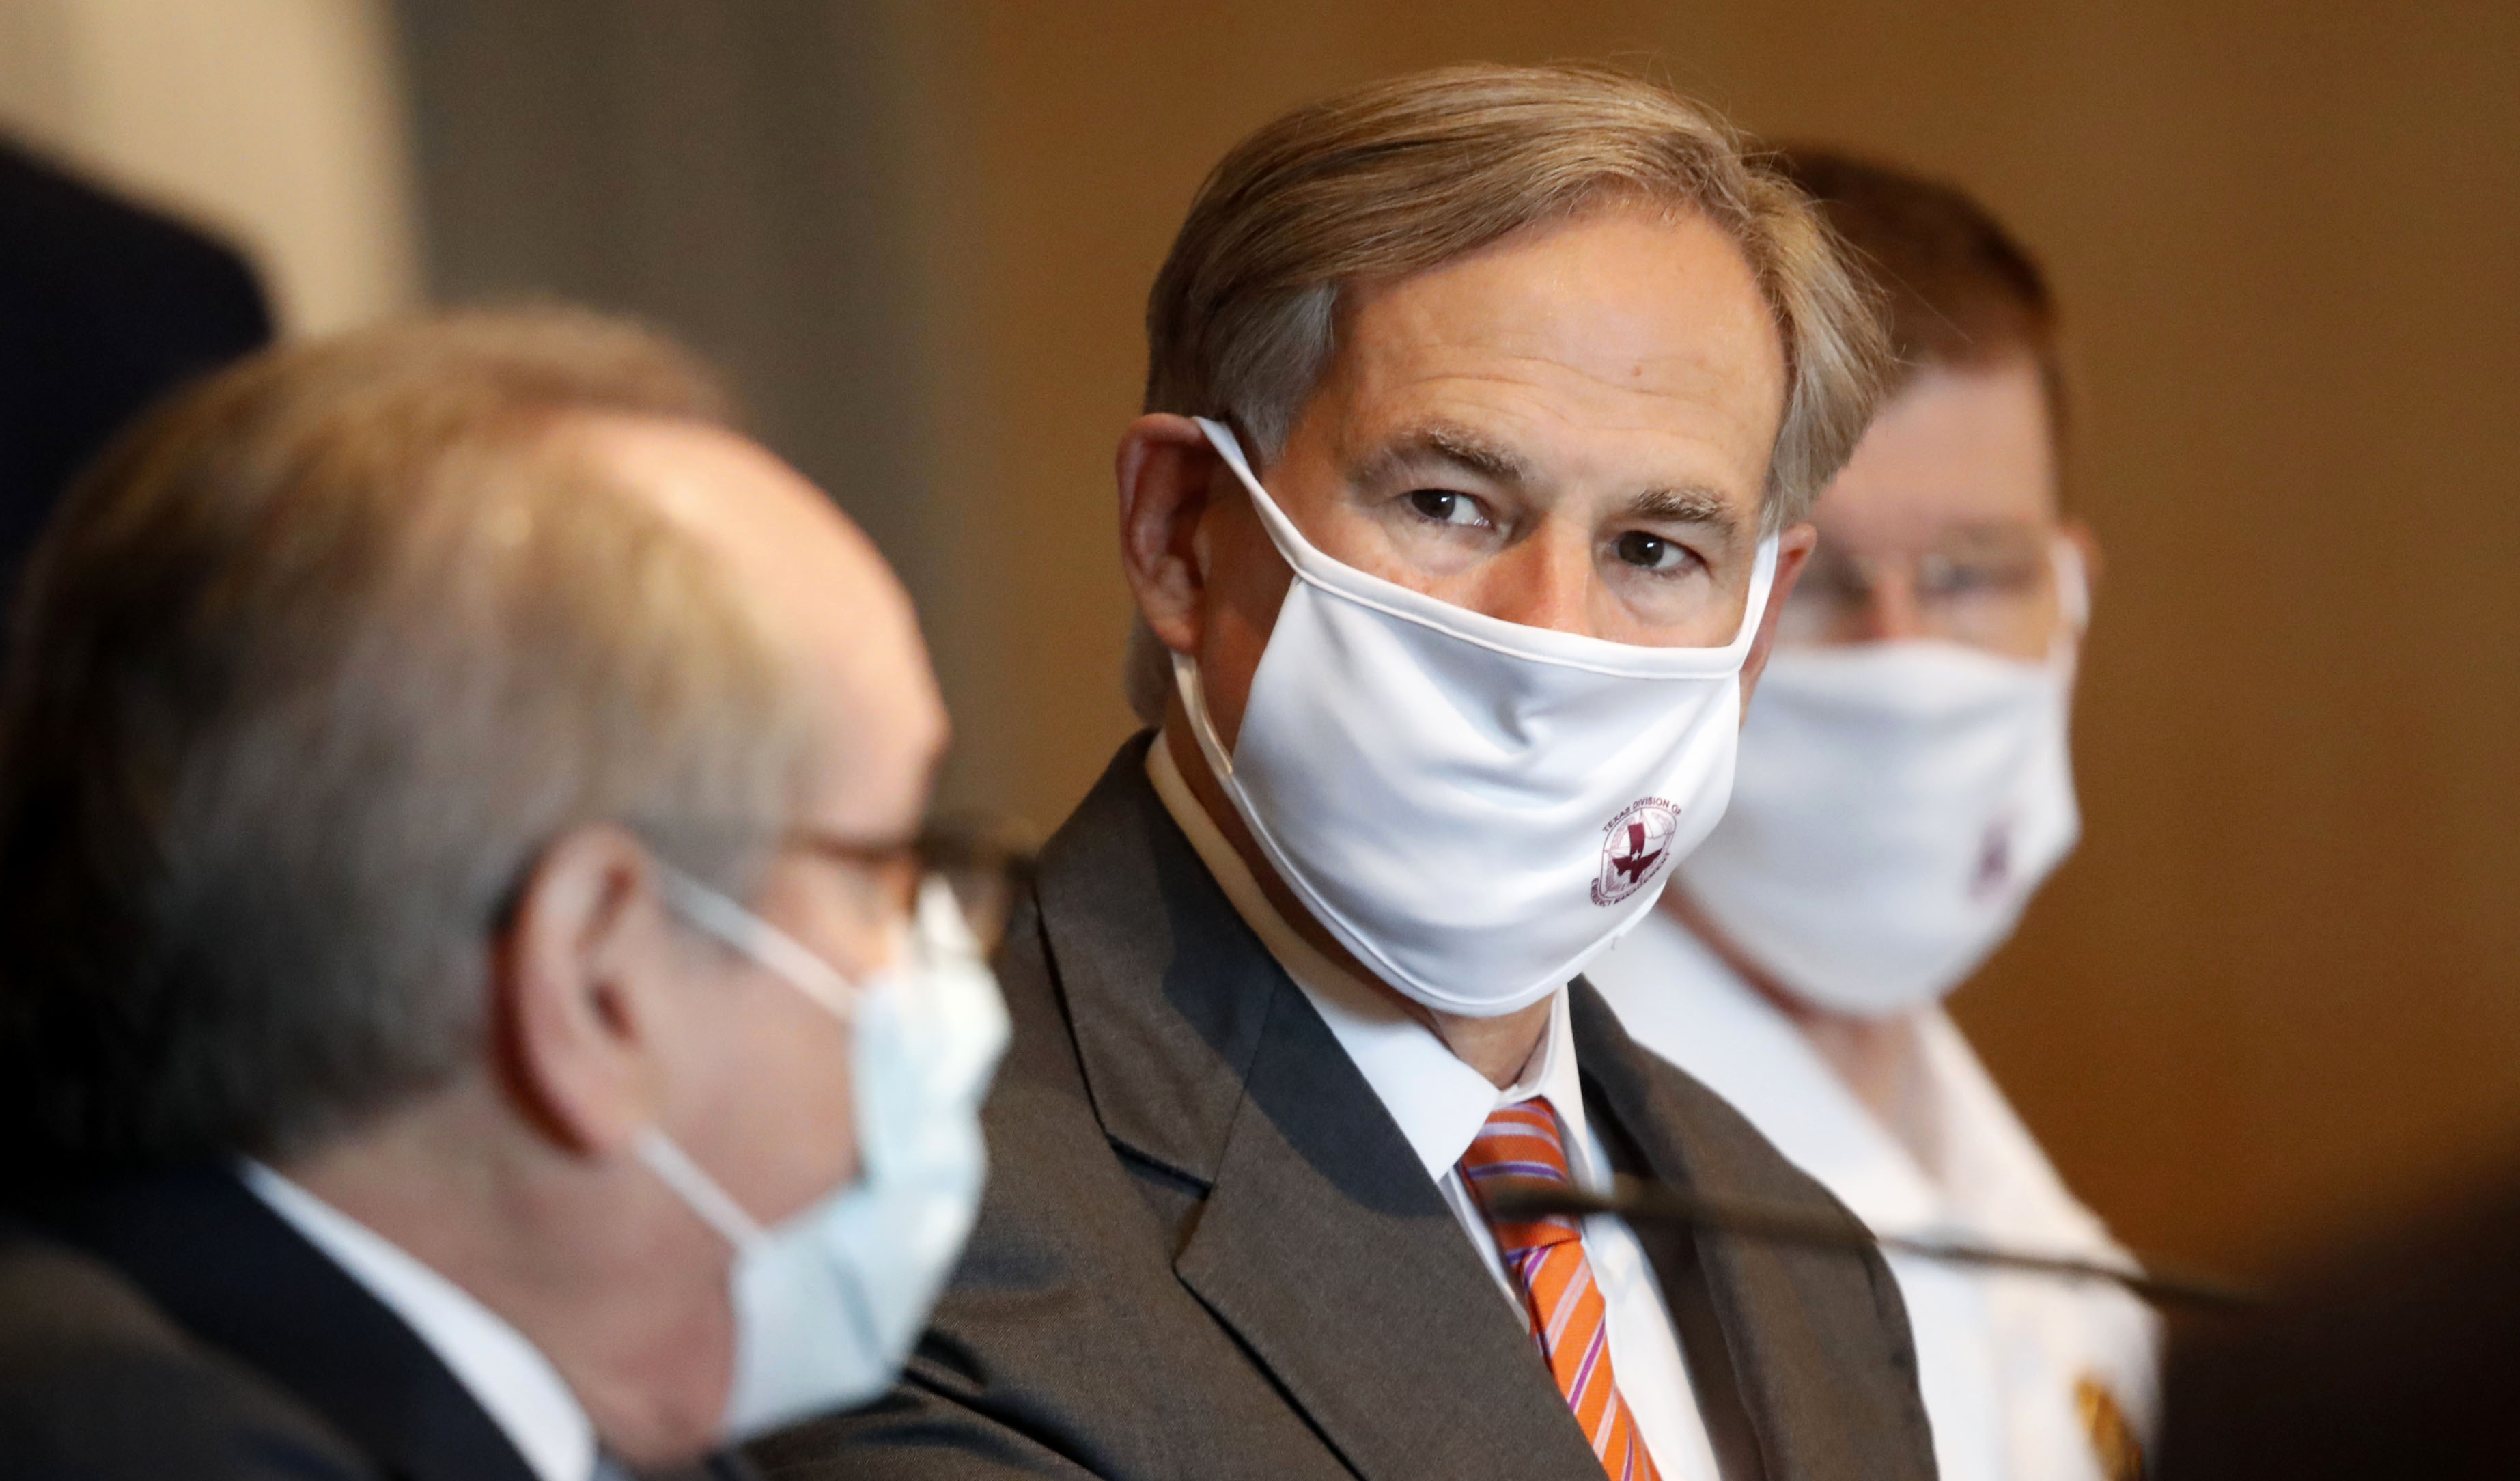 Texas Gov. Greg Abbott attends a news conference in Dallas on August 6.